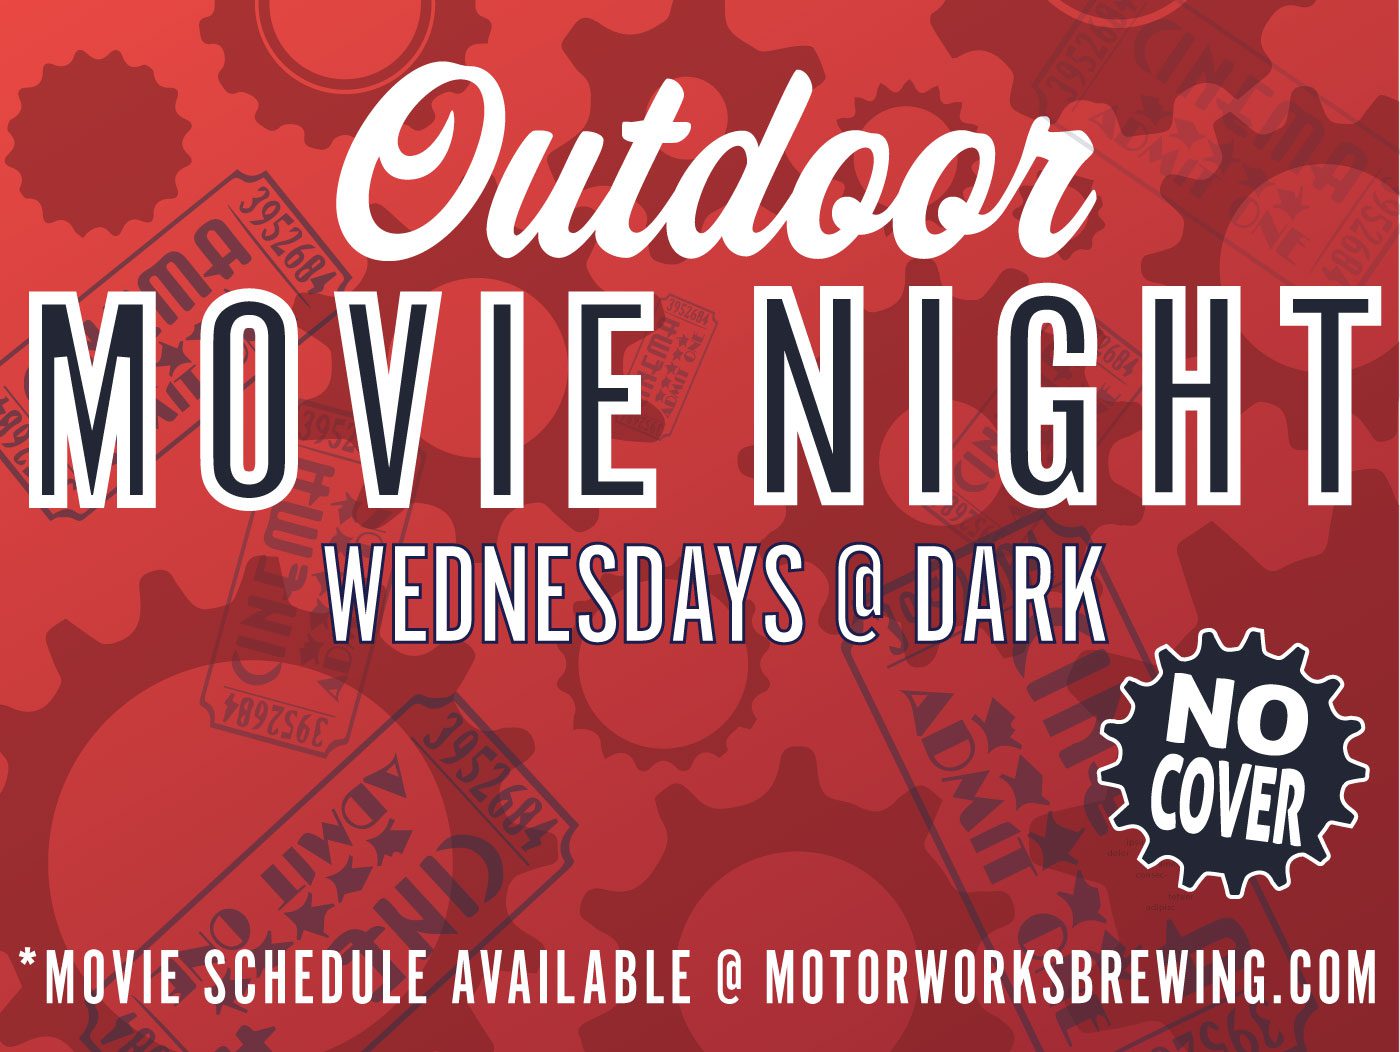 Motorworks Brewing presents Outdoor Movie Night every Wednesday - Starts at Dark and no cover charge